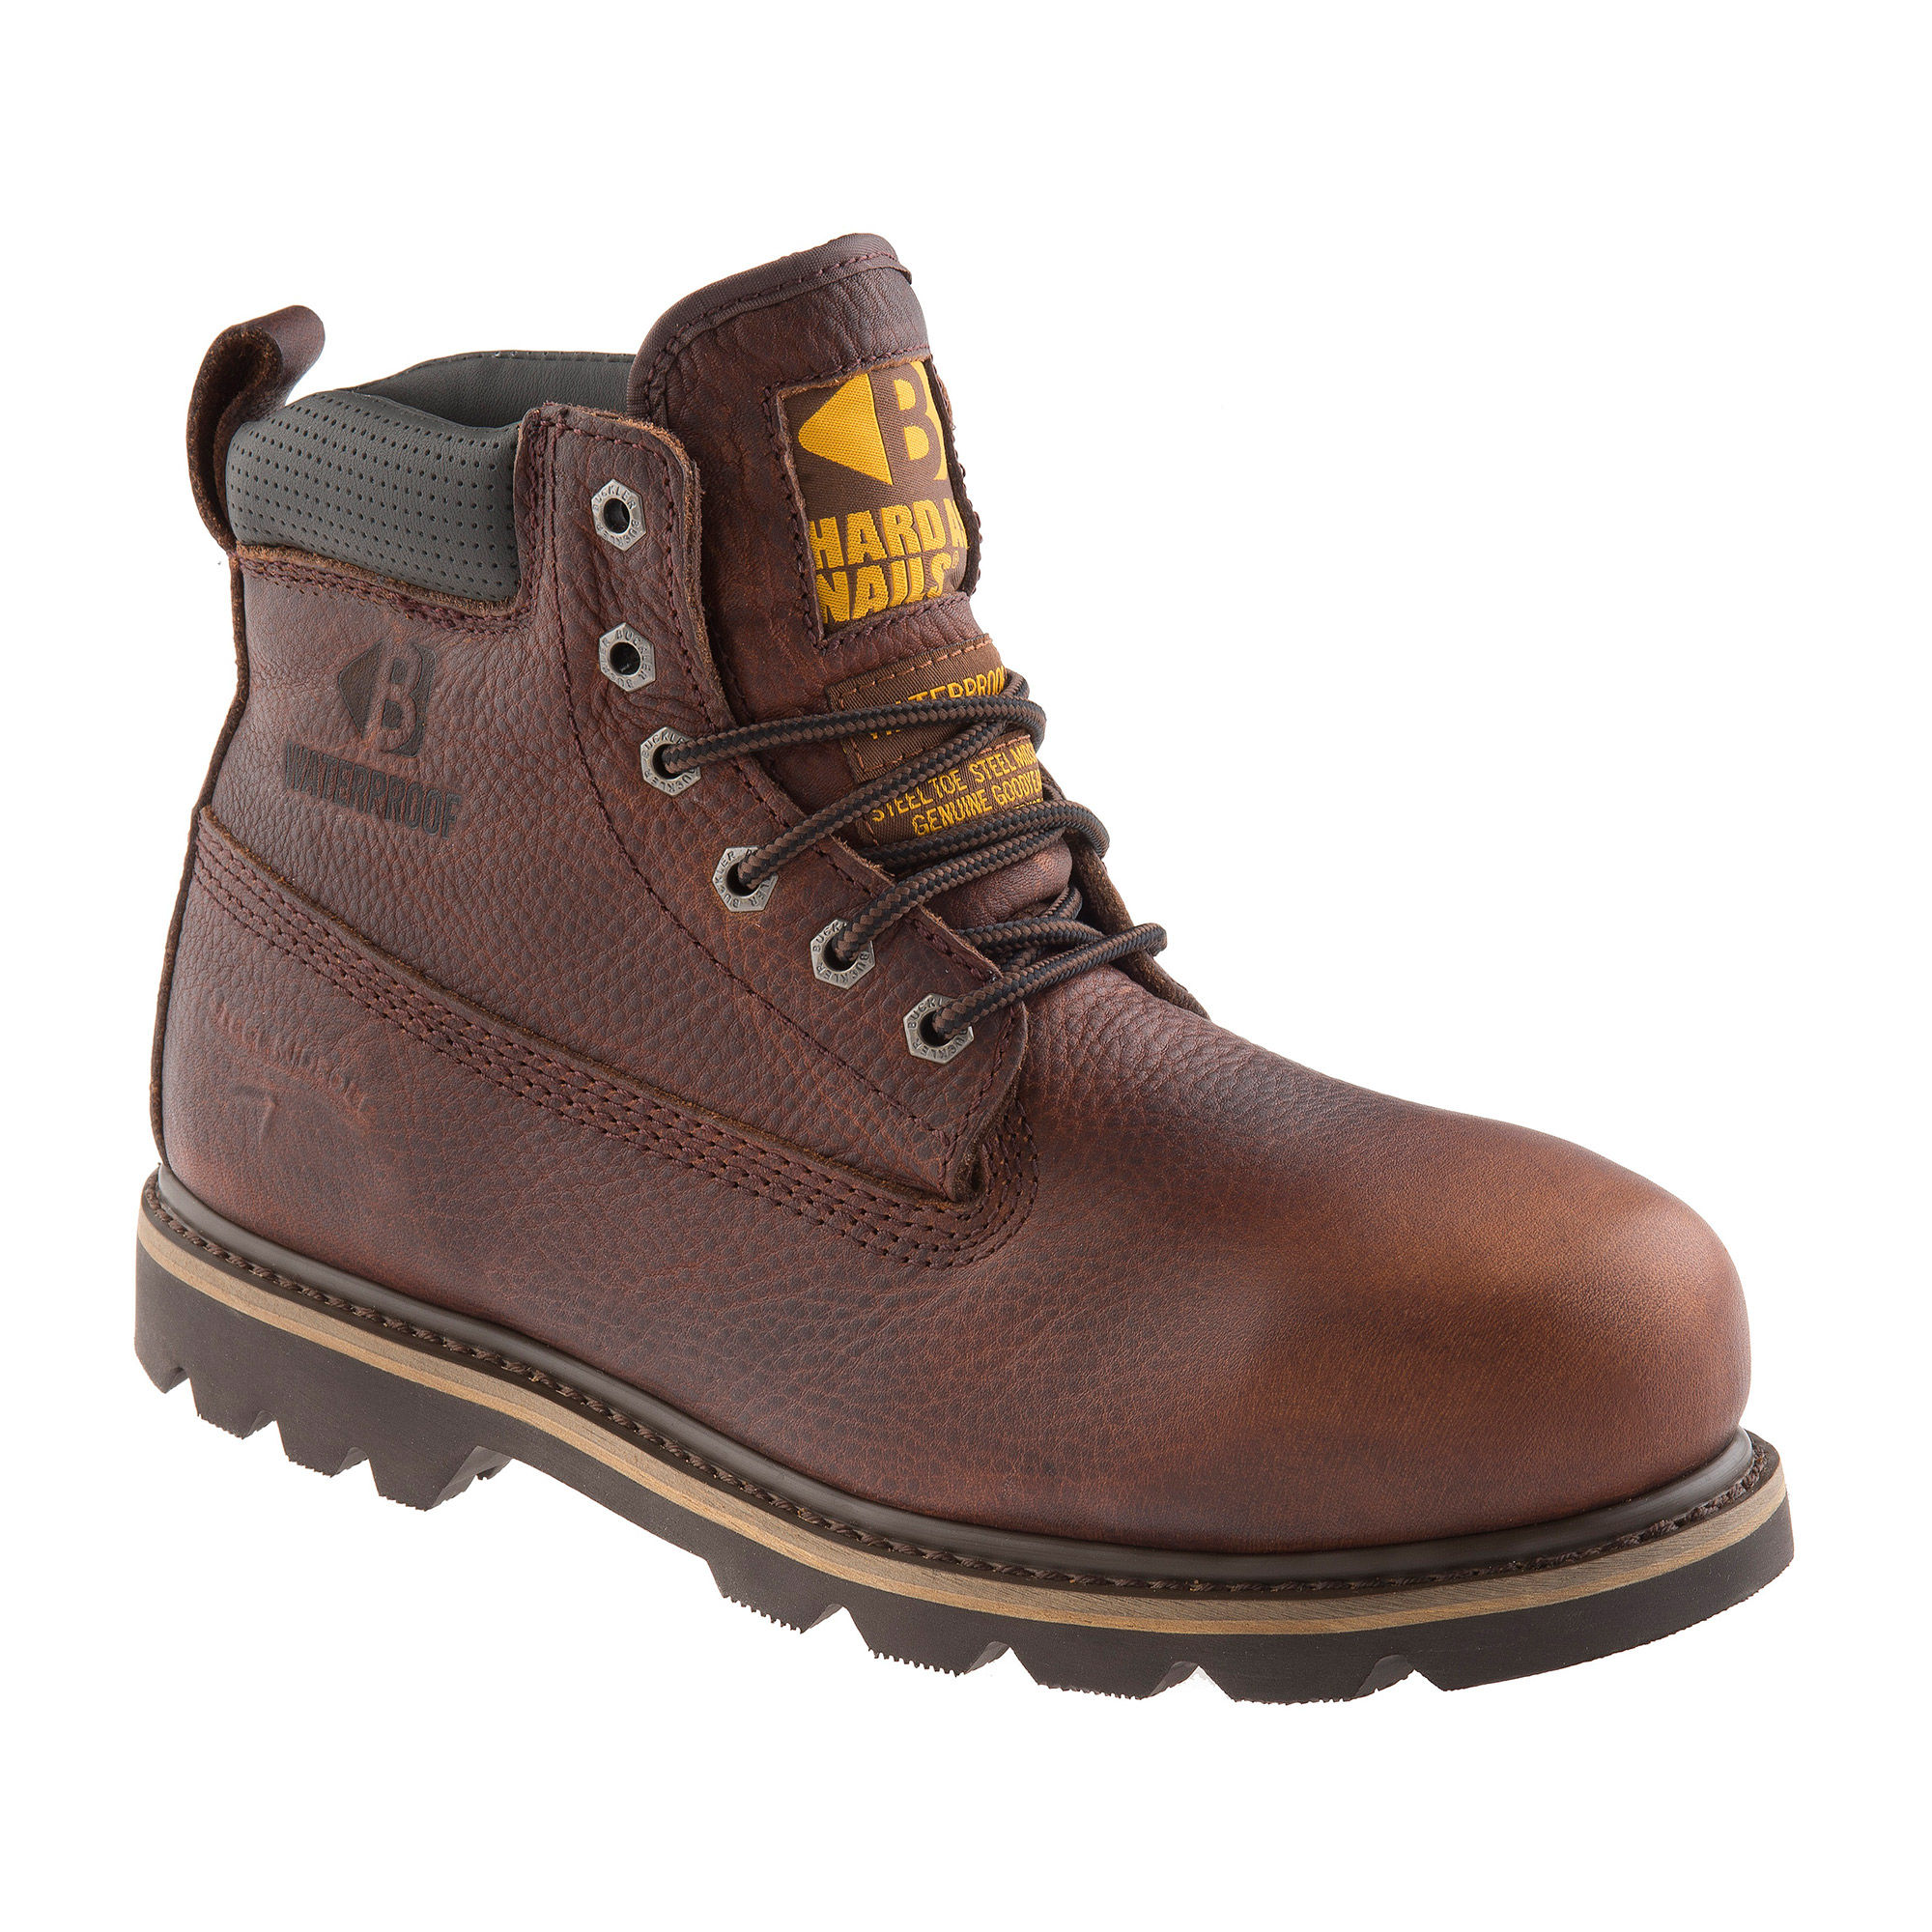 Buckler Goodyear Welted Waterproof Safety Lace Boots Dark Brown - B750SMWPWG